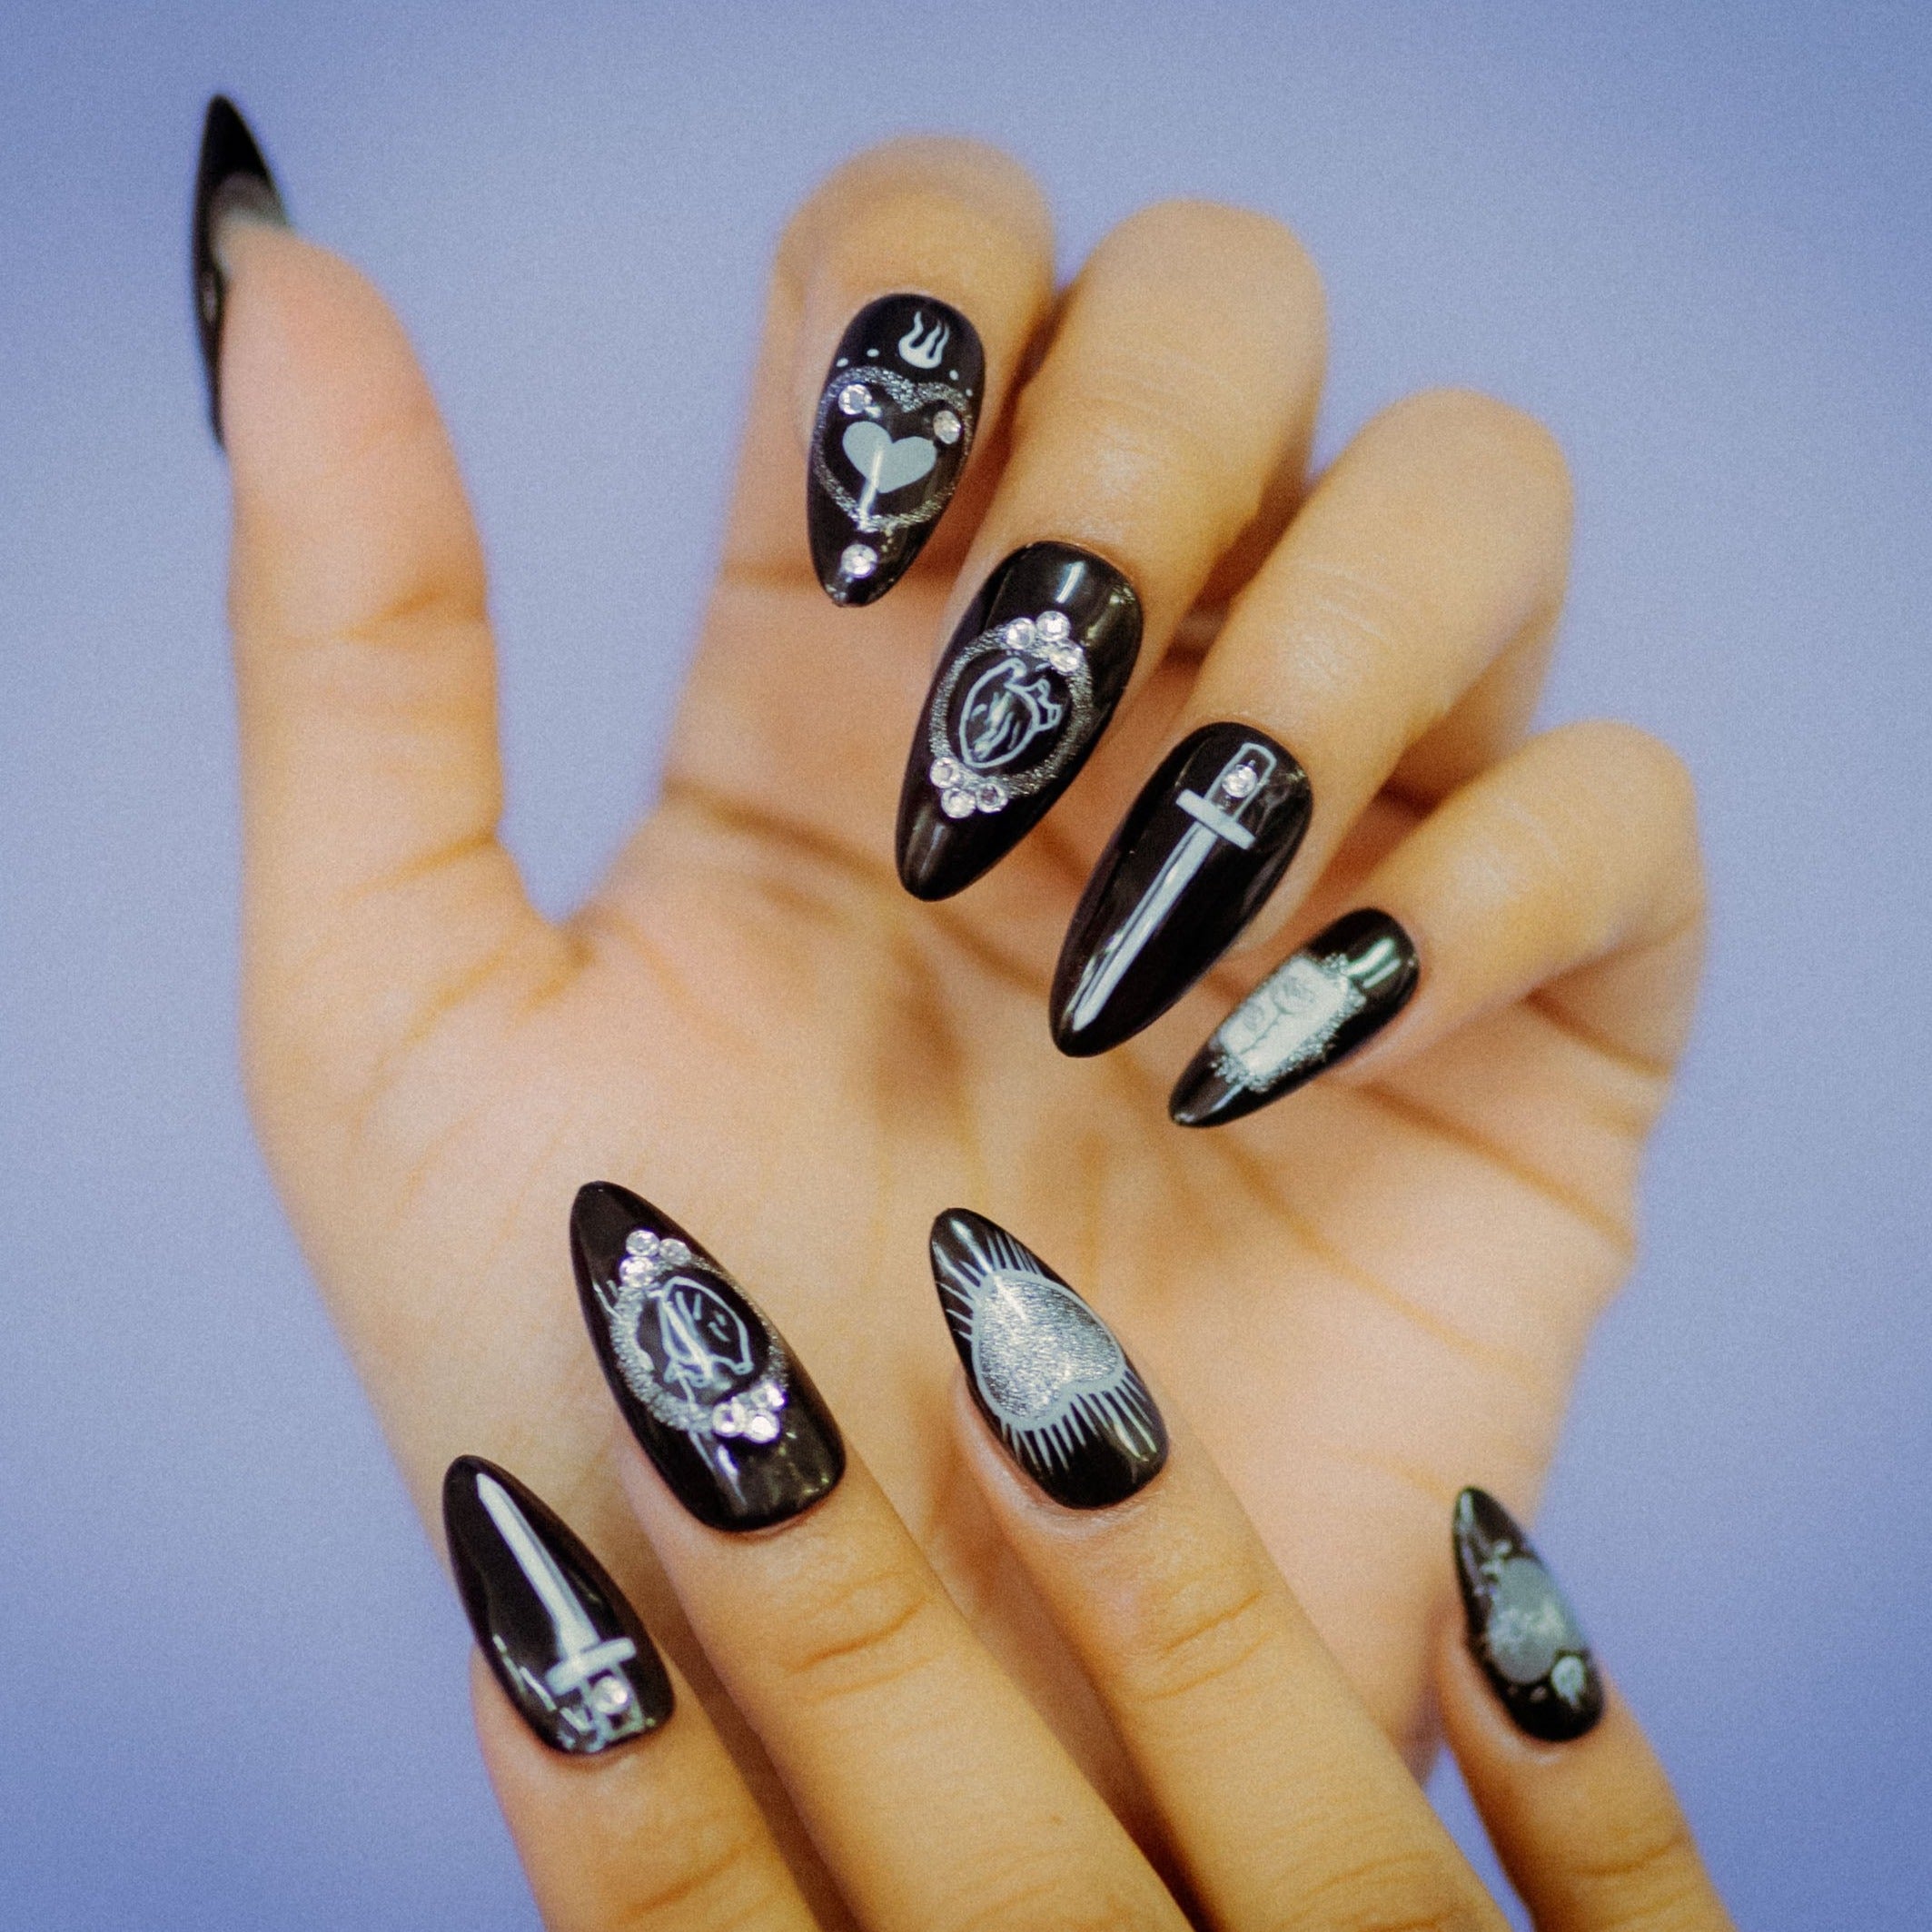 Light-skinned hands showing off the Mea Culpa faux nails, each nail is black, with white designs that are embellished by rainbow holographic details. The nails incorporate Mexican, Catholic, and witchy imagery, such as blades, hearts, and flowers, to create a uniquely gothic aesthetic